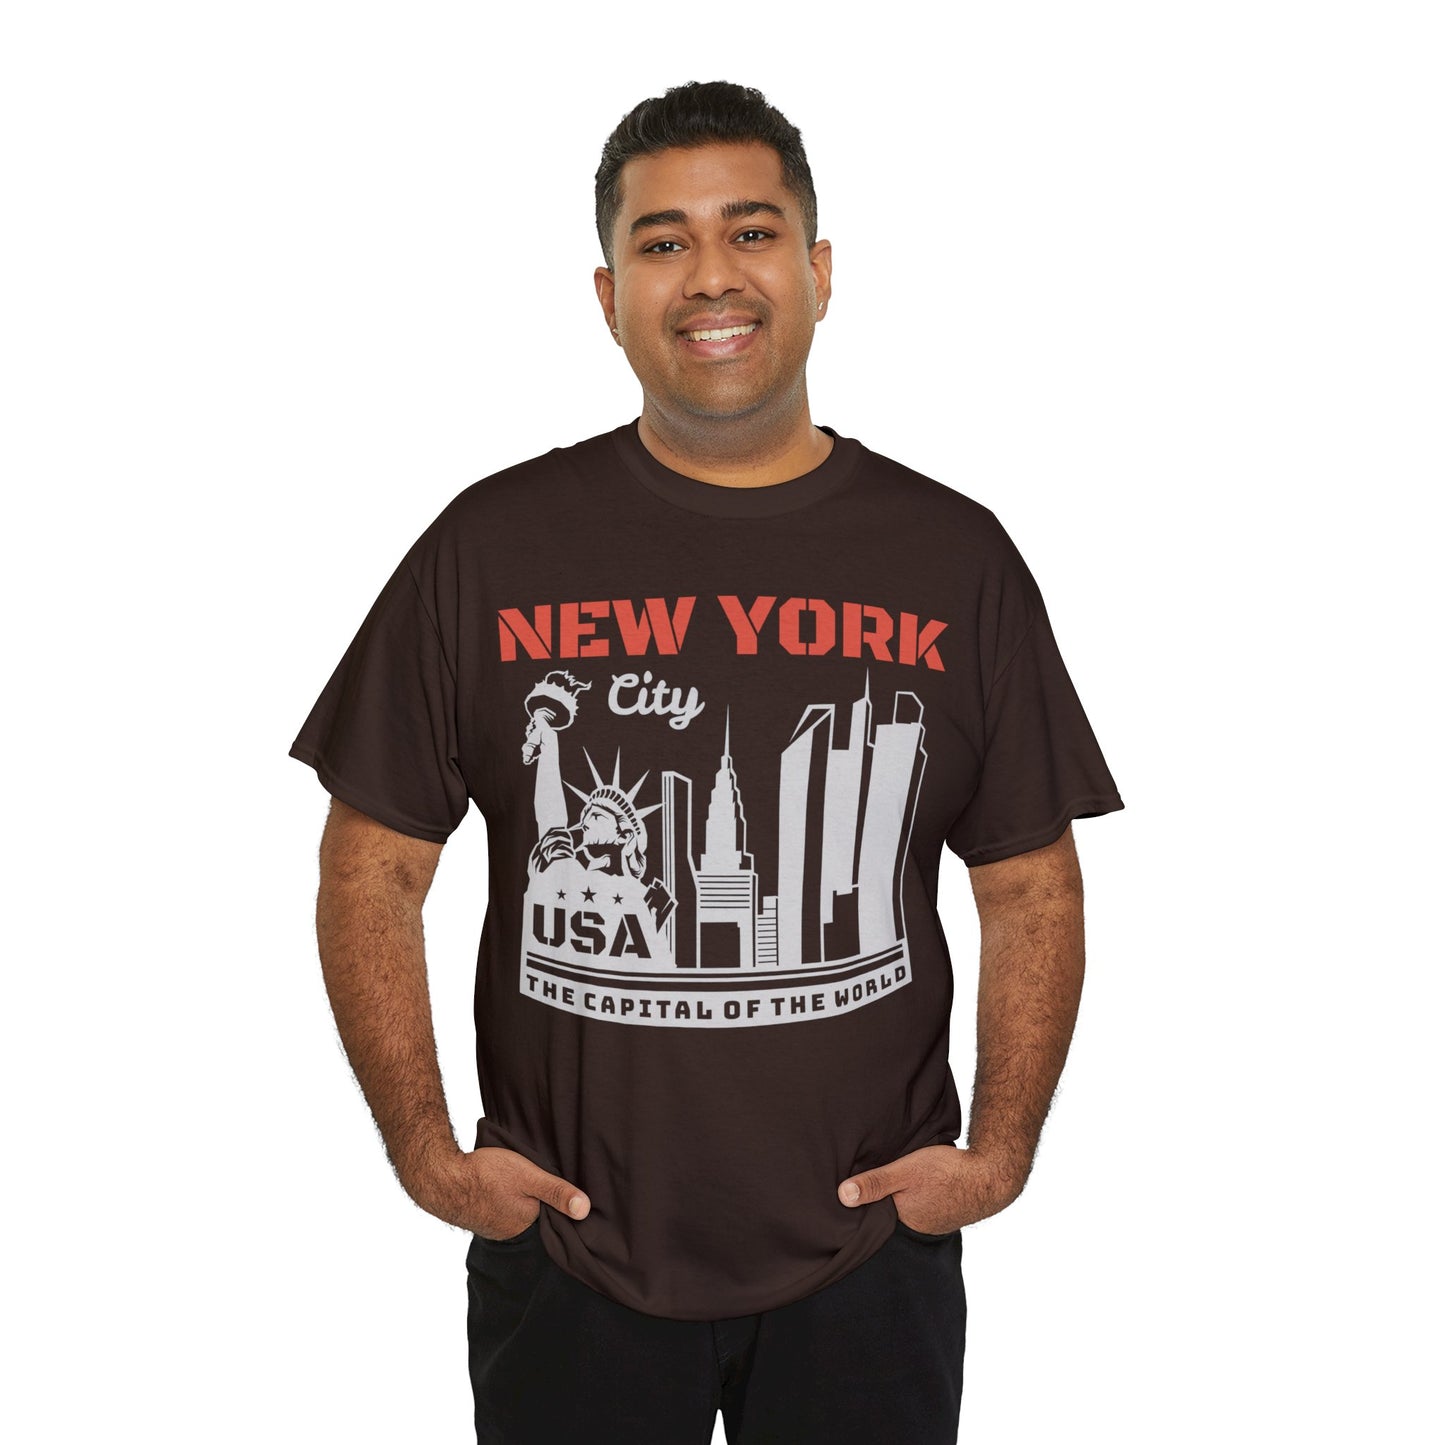 Explore the City That Never Sleeps with Our Stylish New York City T-Shirt